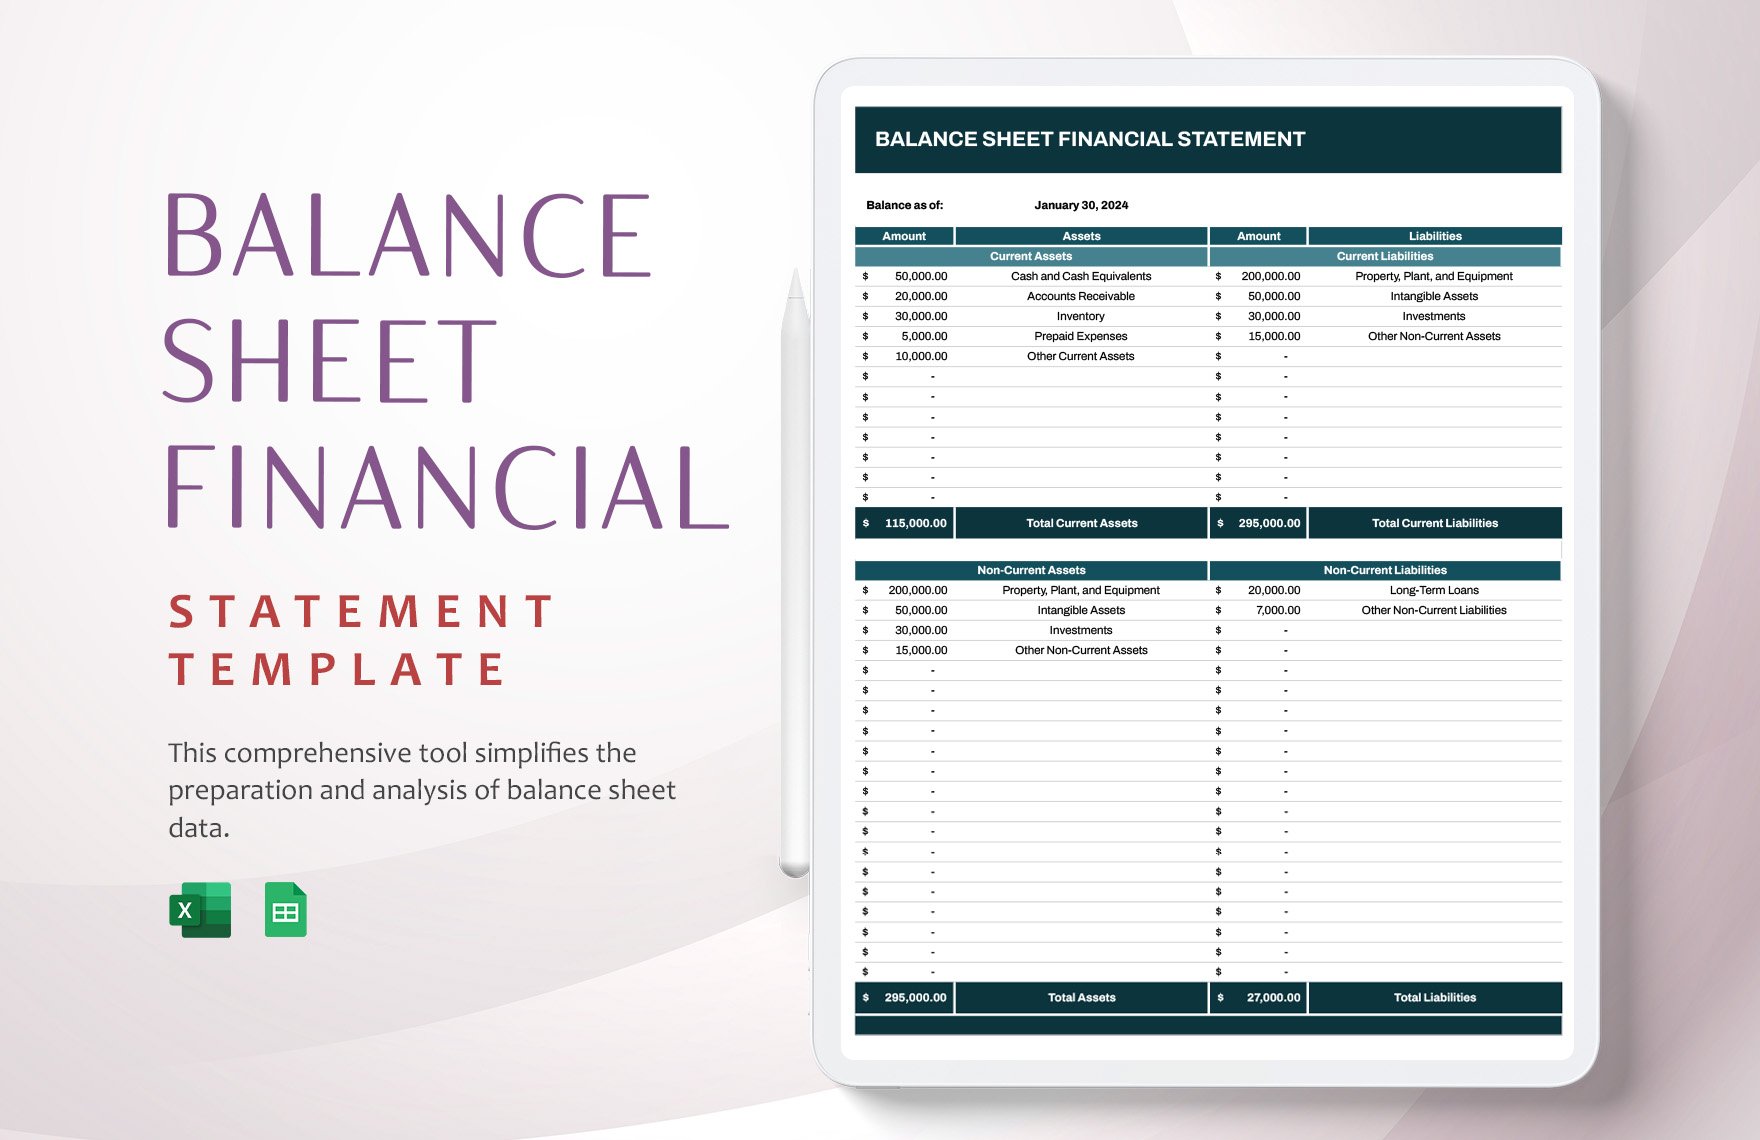 Balance Sheet Financial Statement Template in Excel, Google Sheets